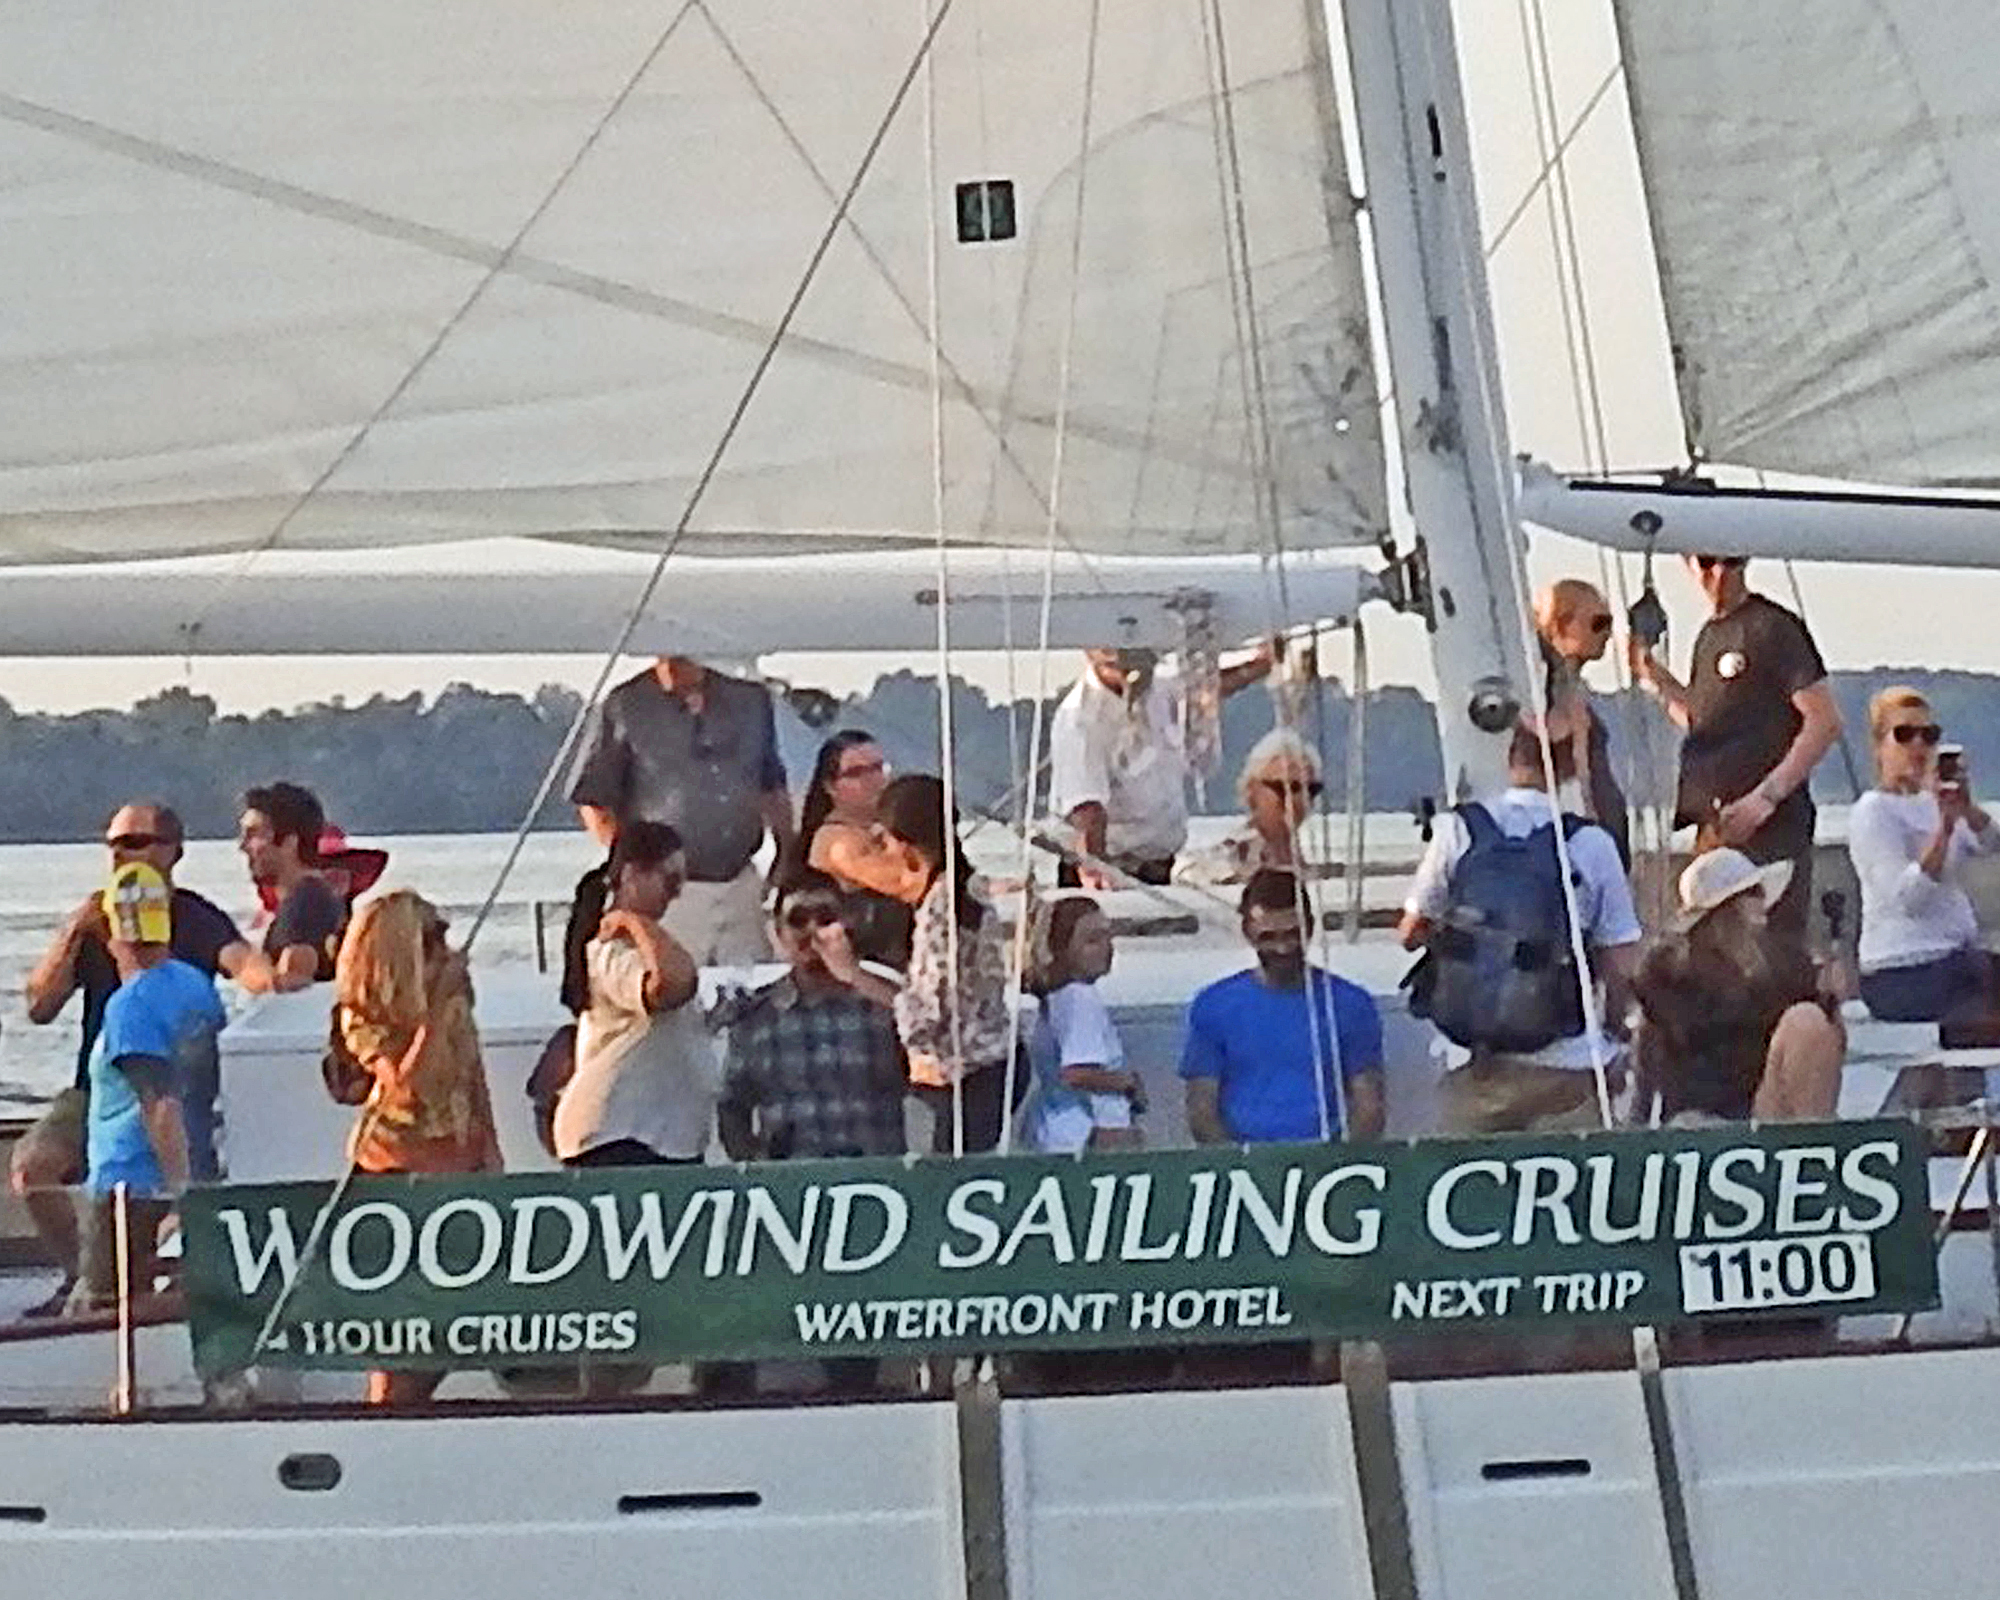 Woodwind Sailing Cruises banner on the side of schooner with guests